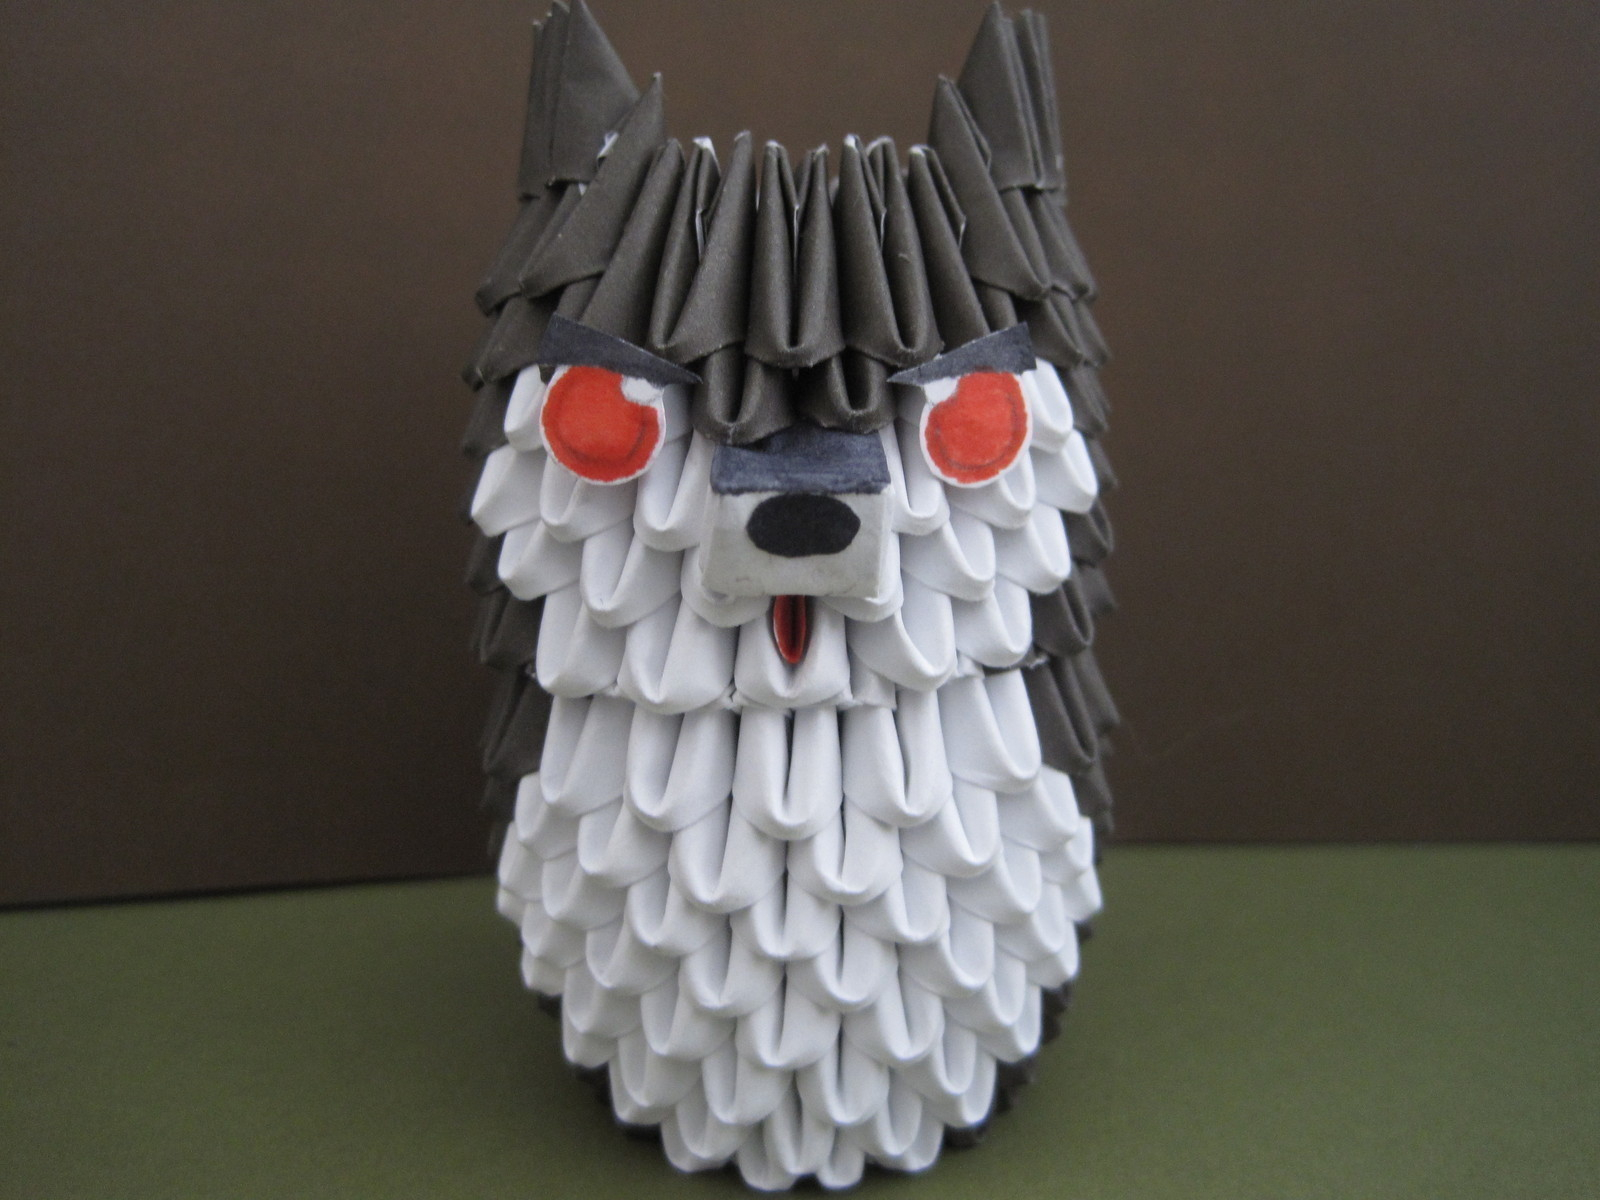 Origami Wolf Tutorial 3 D Origami Husky Puppy Wolf An Origami Dog Paper Folding And